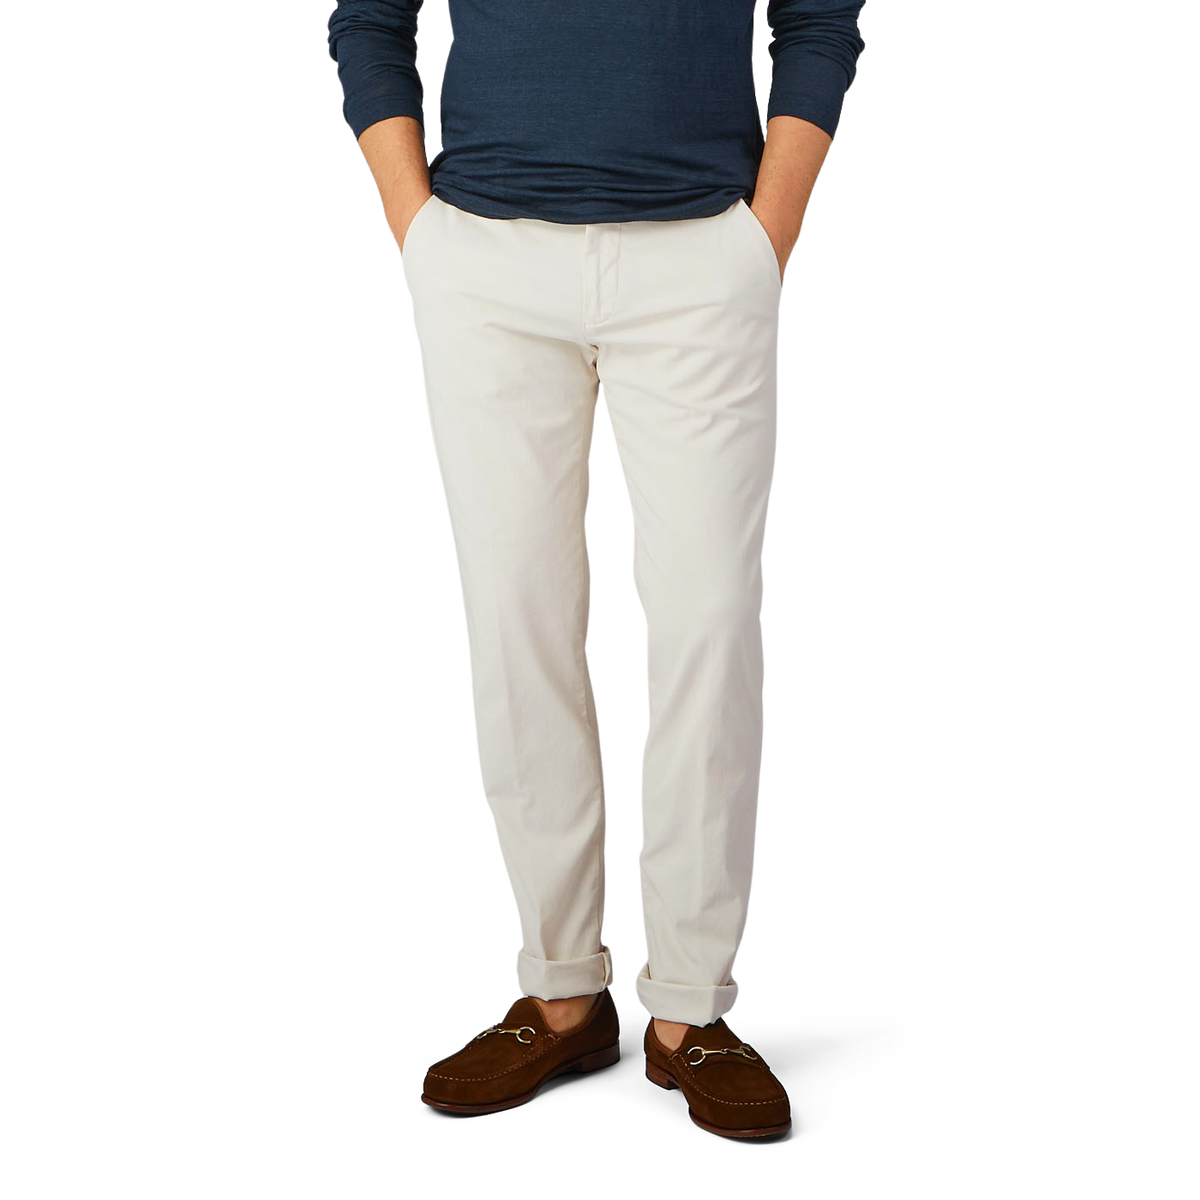 A man in slim fit Light Beige Cotton Stretch Chinos from Berwich and a blue cotton shirt.